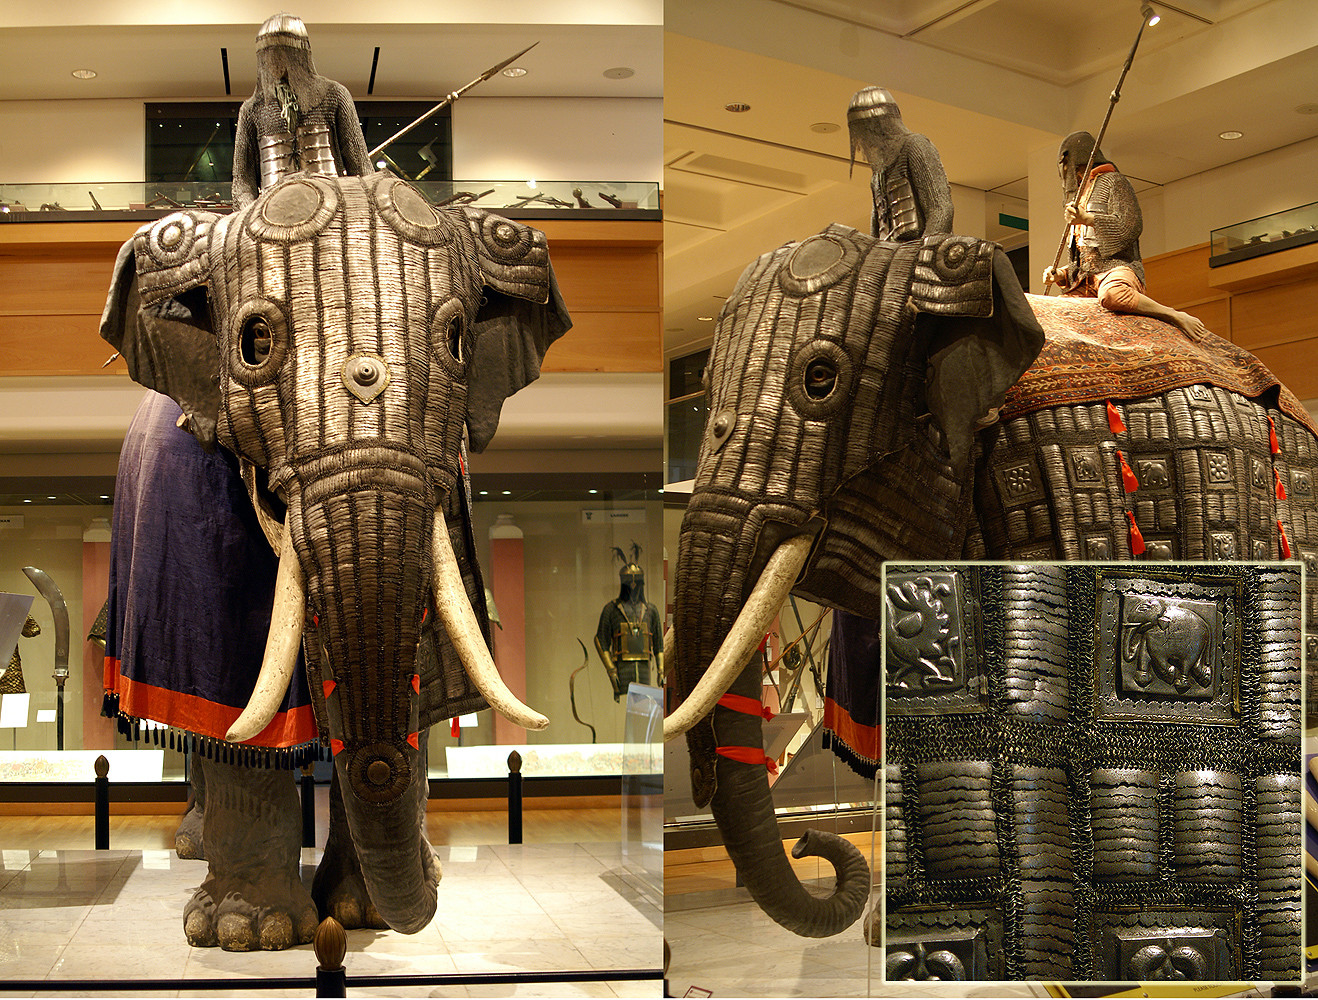 Elephant armour from 17th century India. It's composed of 5,840 plates and weighs 118kg